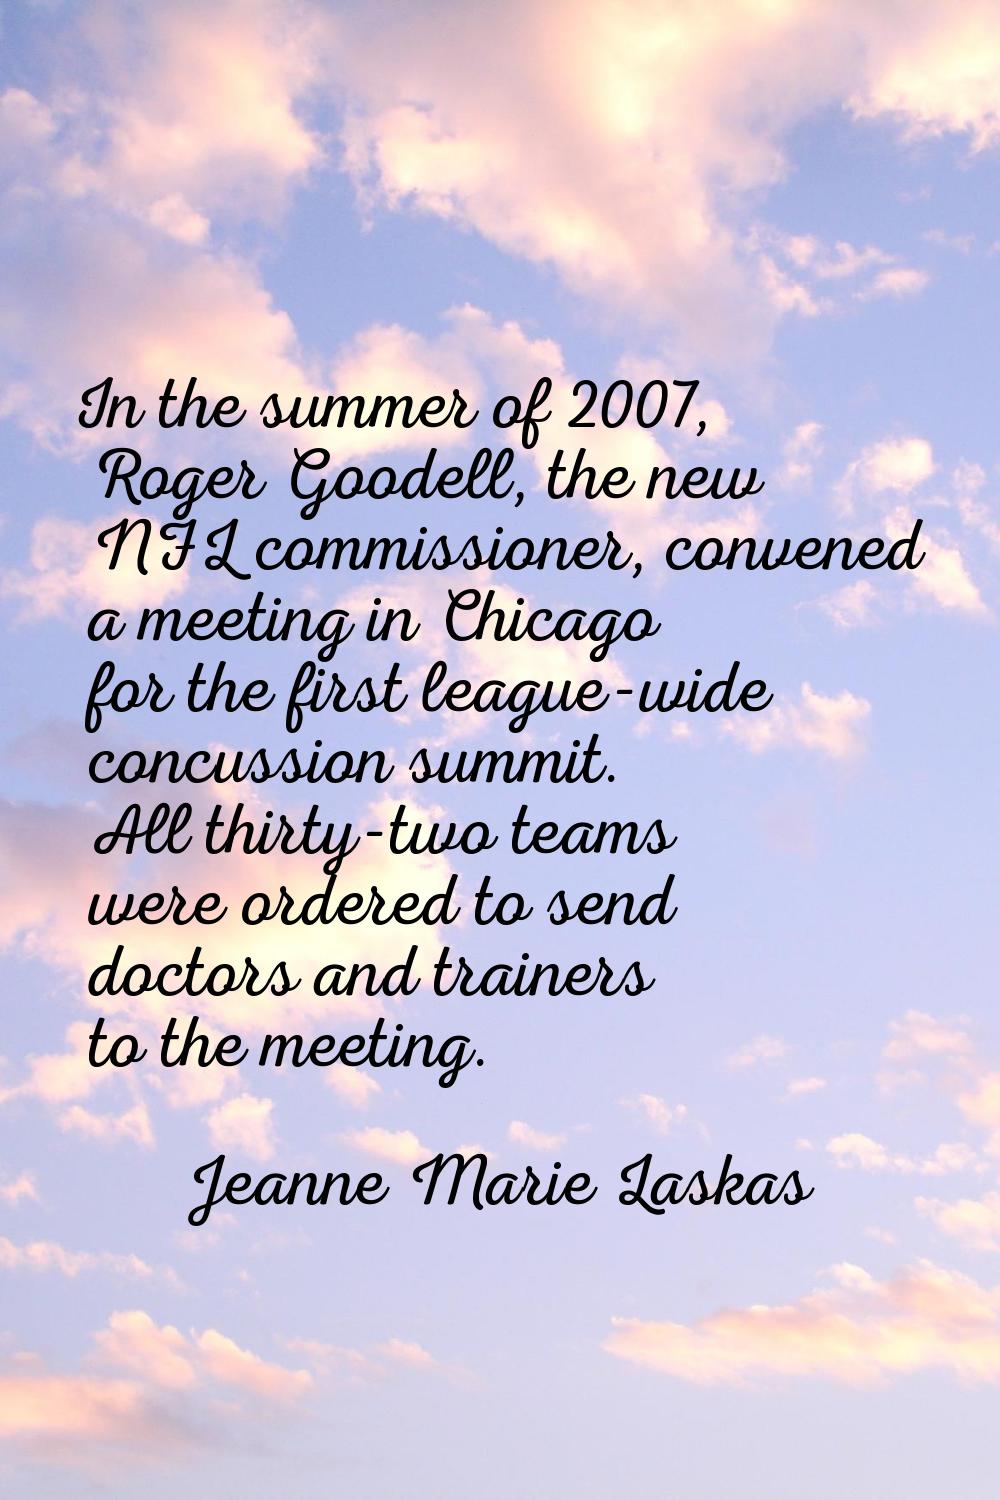 In the summer of 2007, Roger Goodell, the new NFL commissioner, convened a meeting in Chicago for t